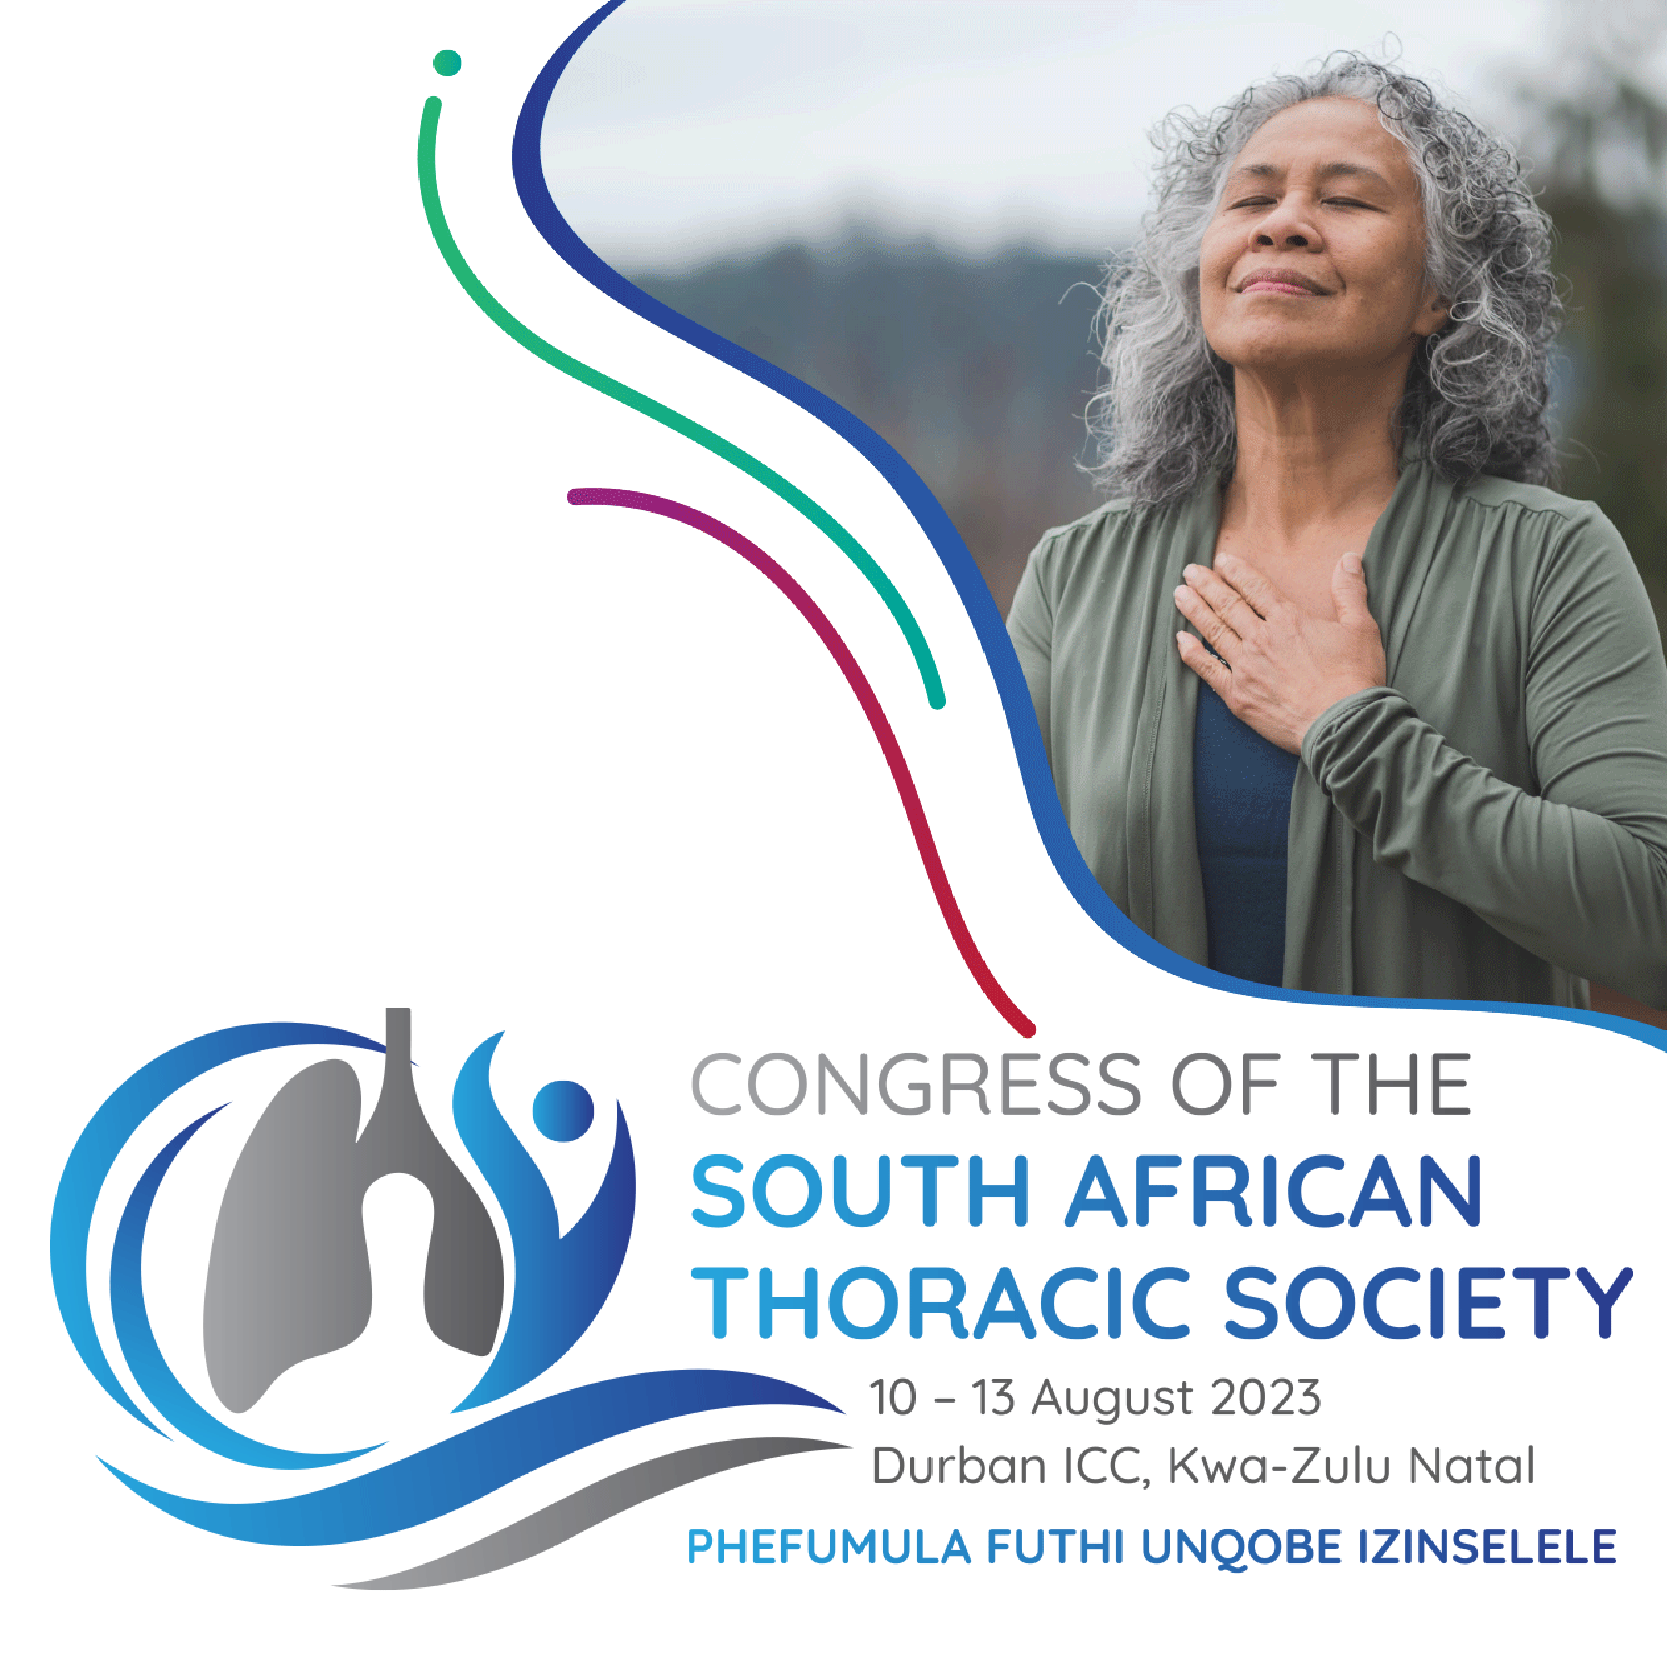 dfgdfgxfg (1) - South African Thoracic Society